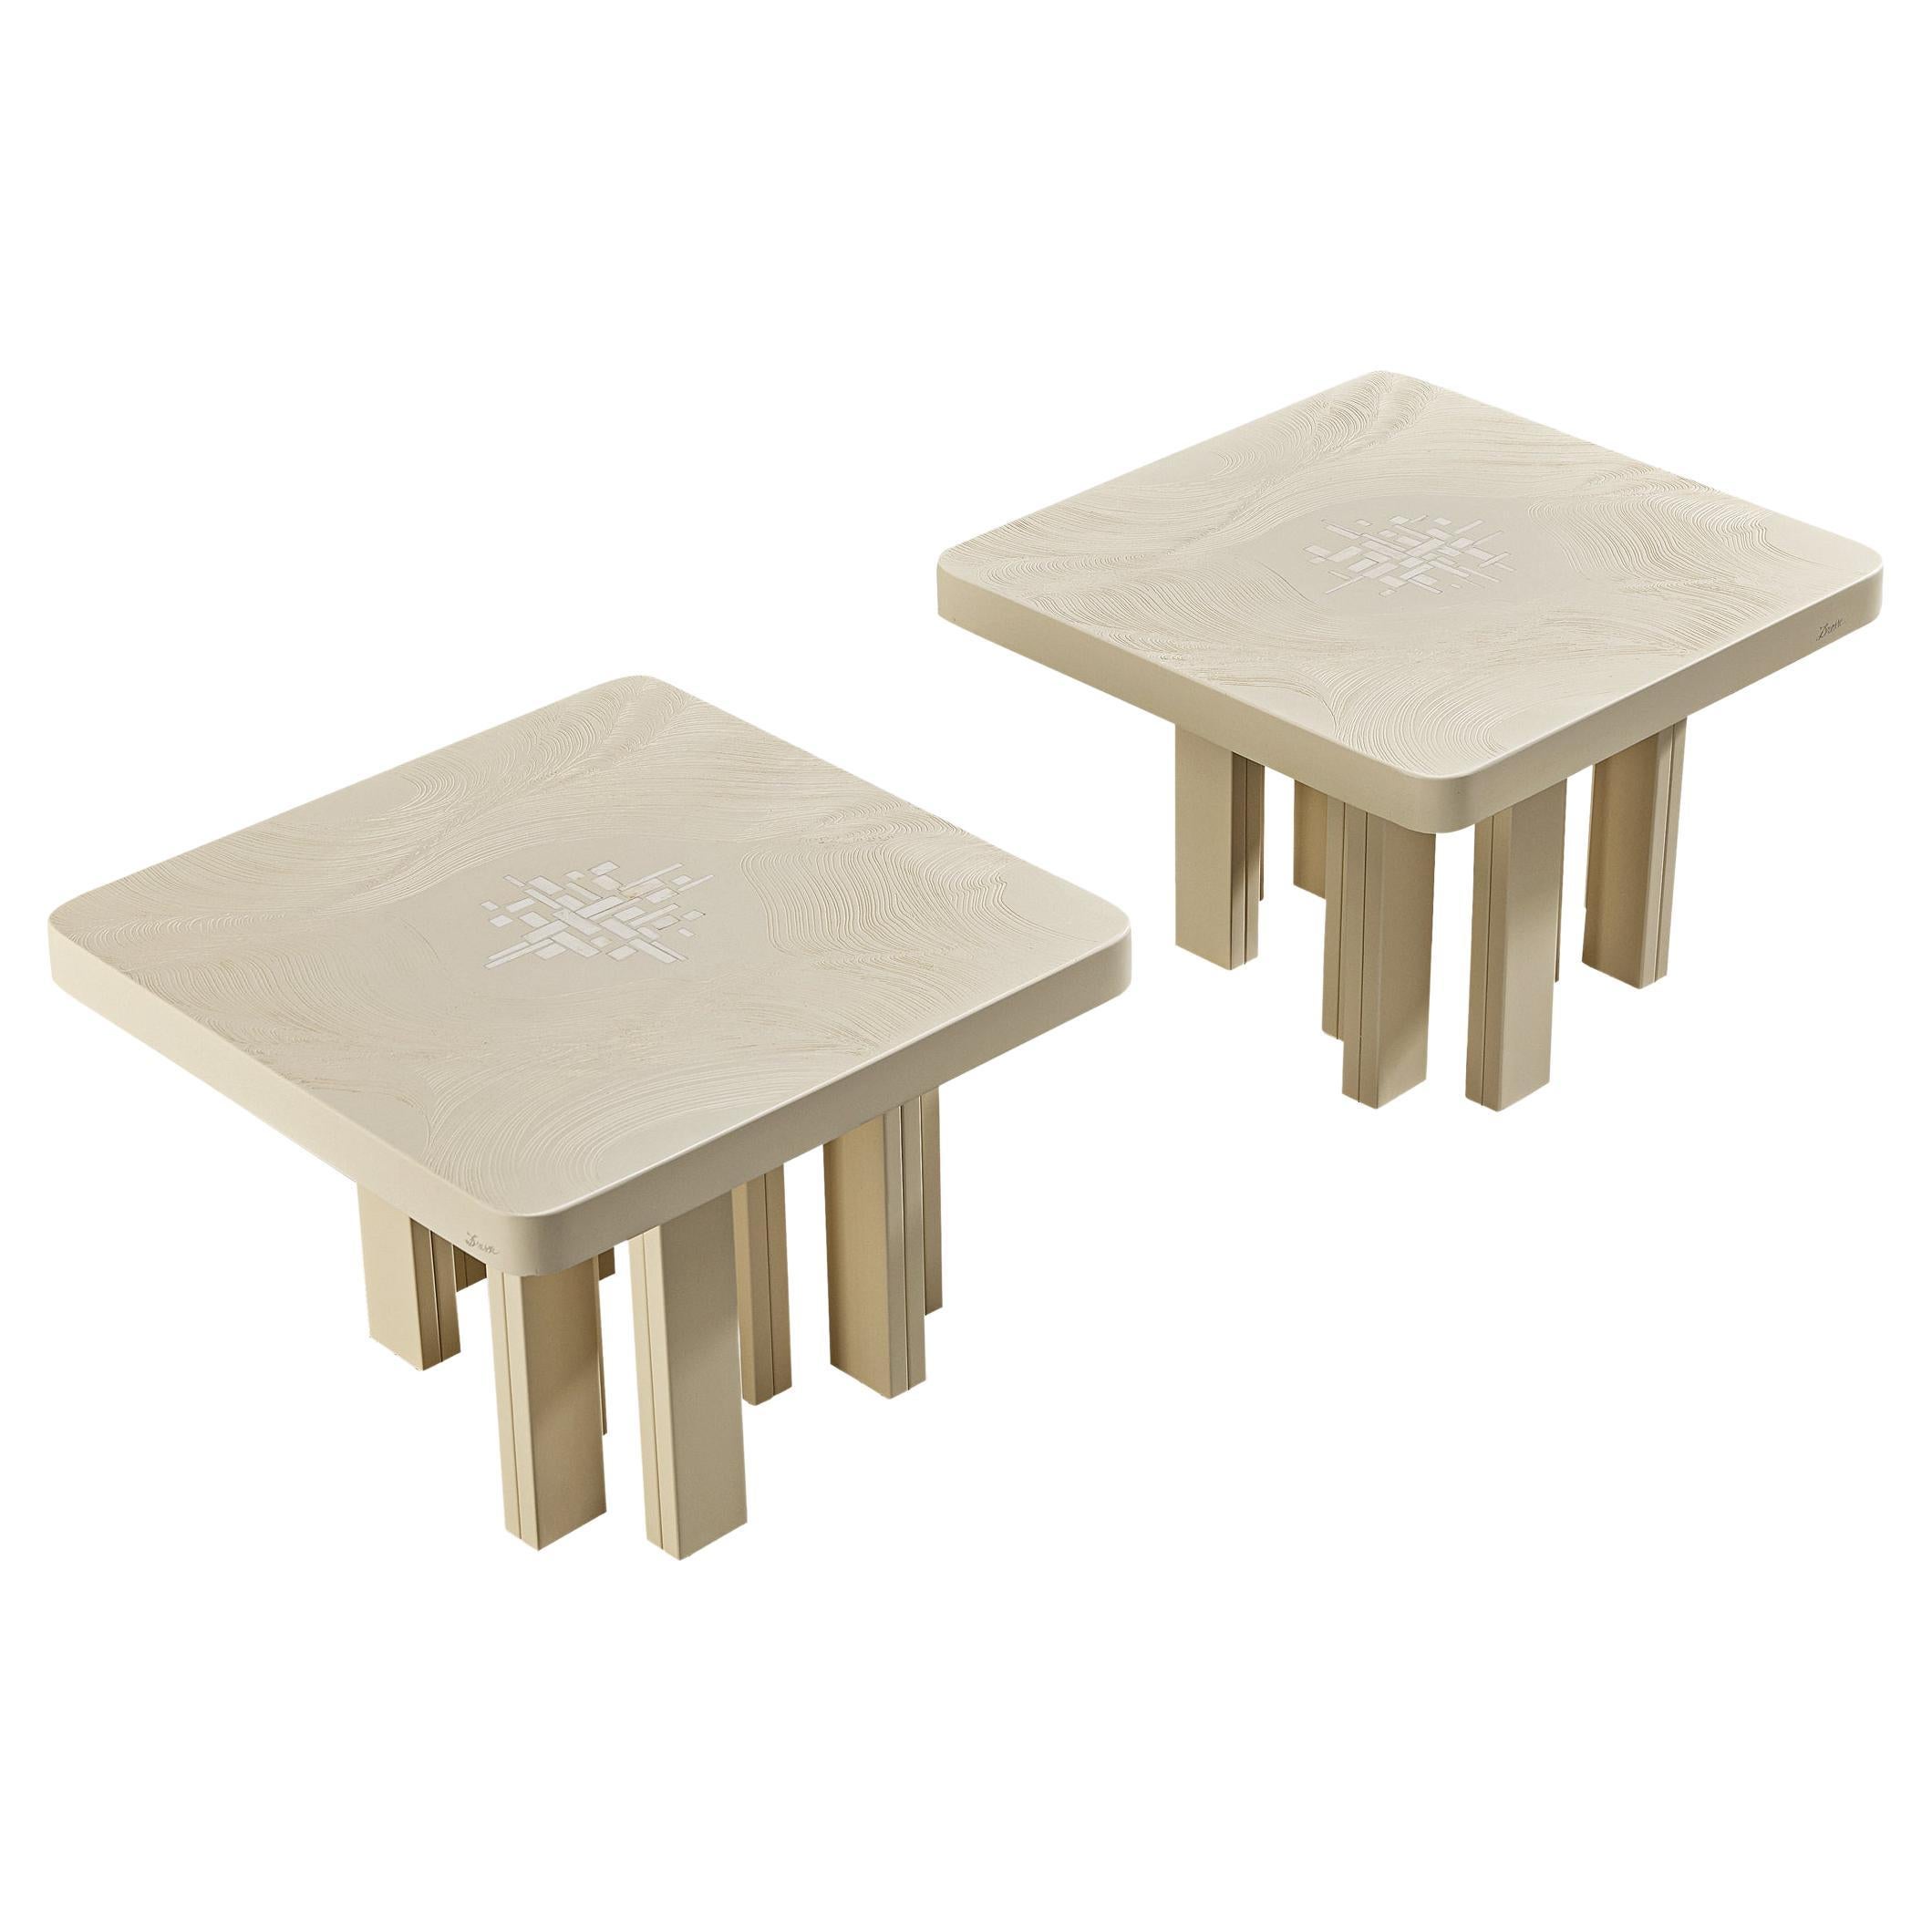 Jean Claude Dresse Pair of Coffee Tables in Resin with Bone Inlay 